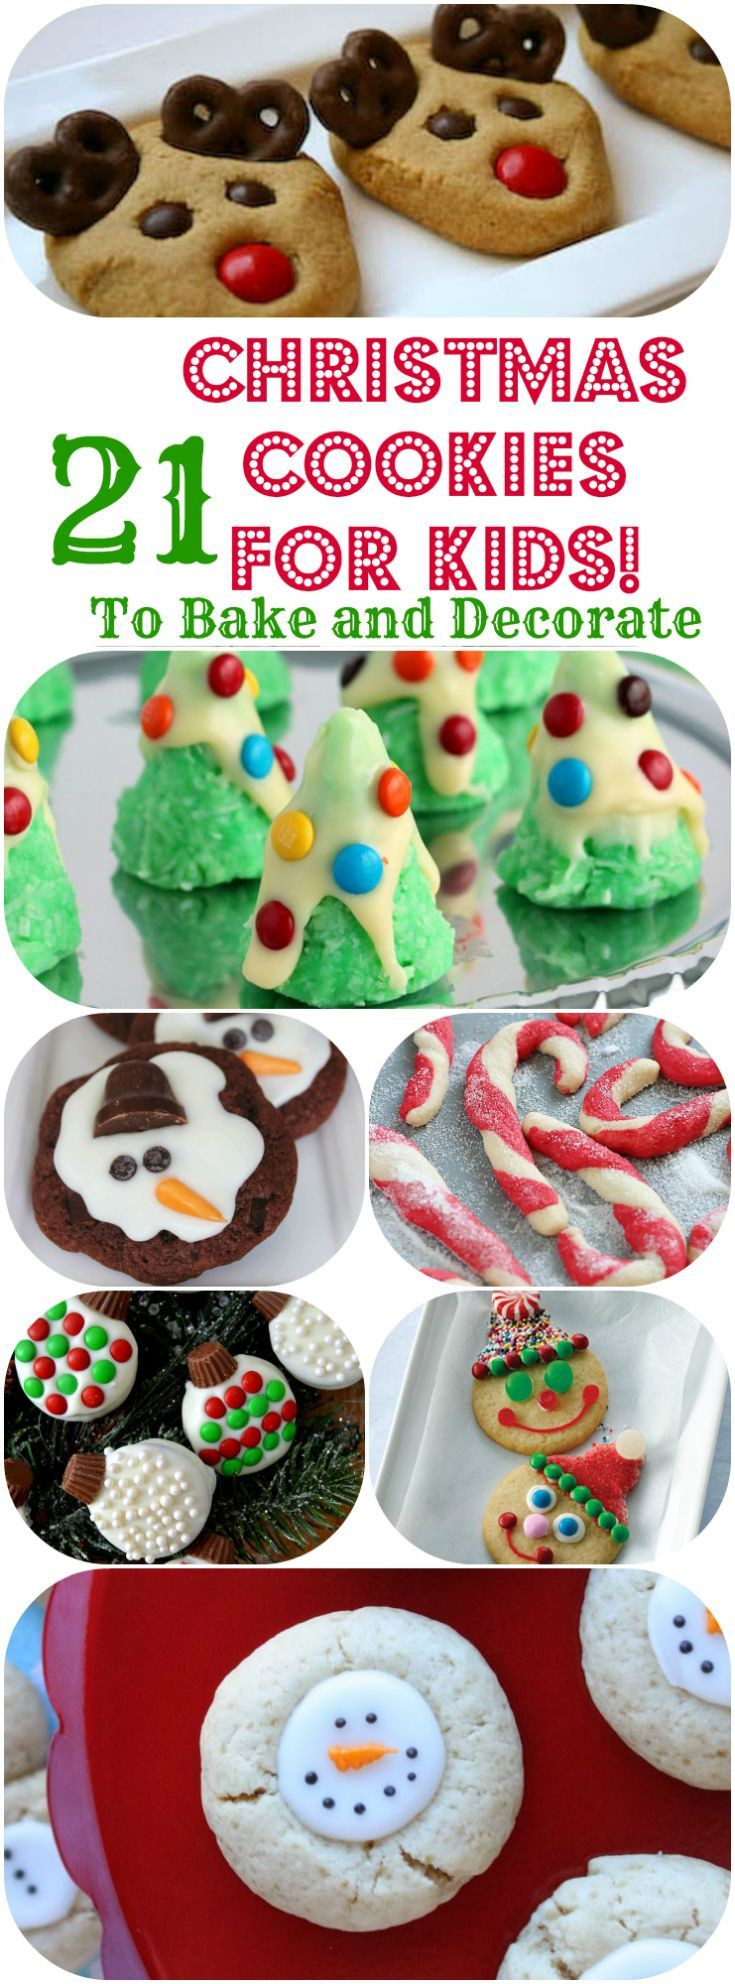 Easy Christmas Desserts For Kids
 1000 ideas about Kid Desserts on Pinterest